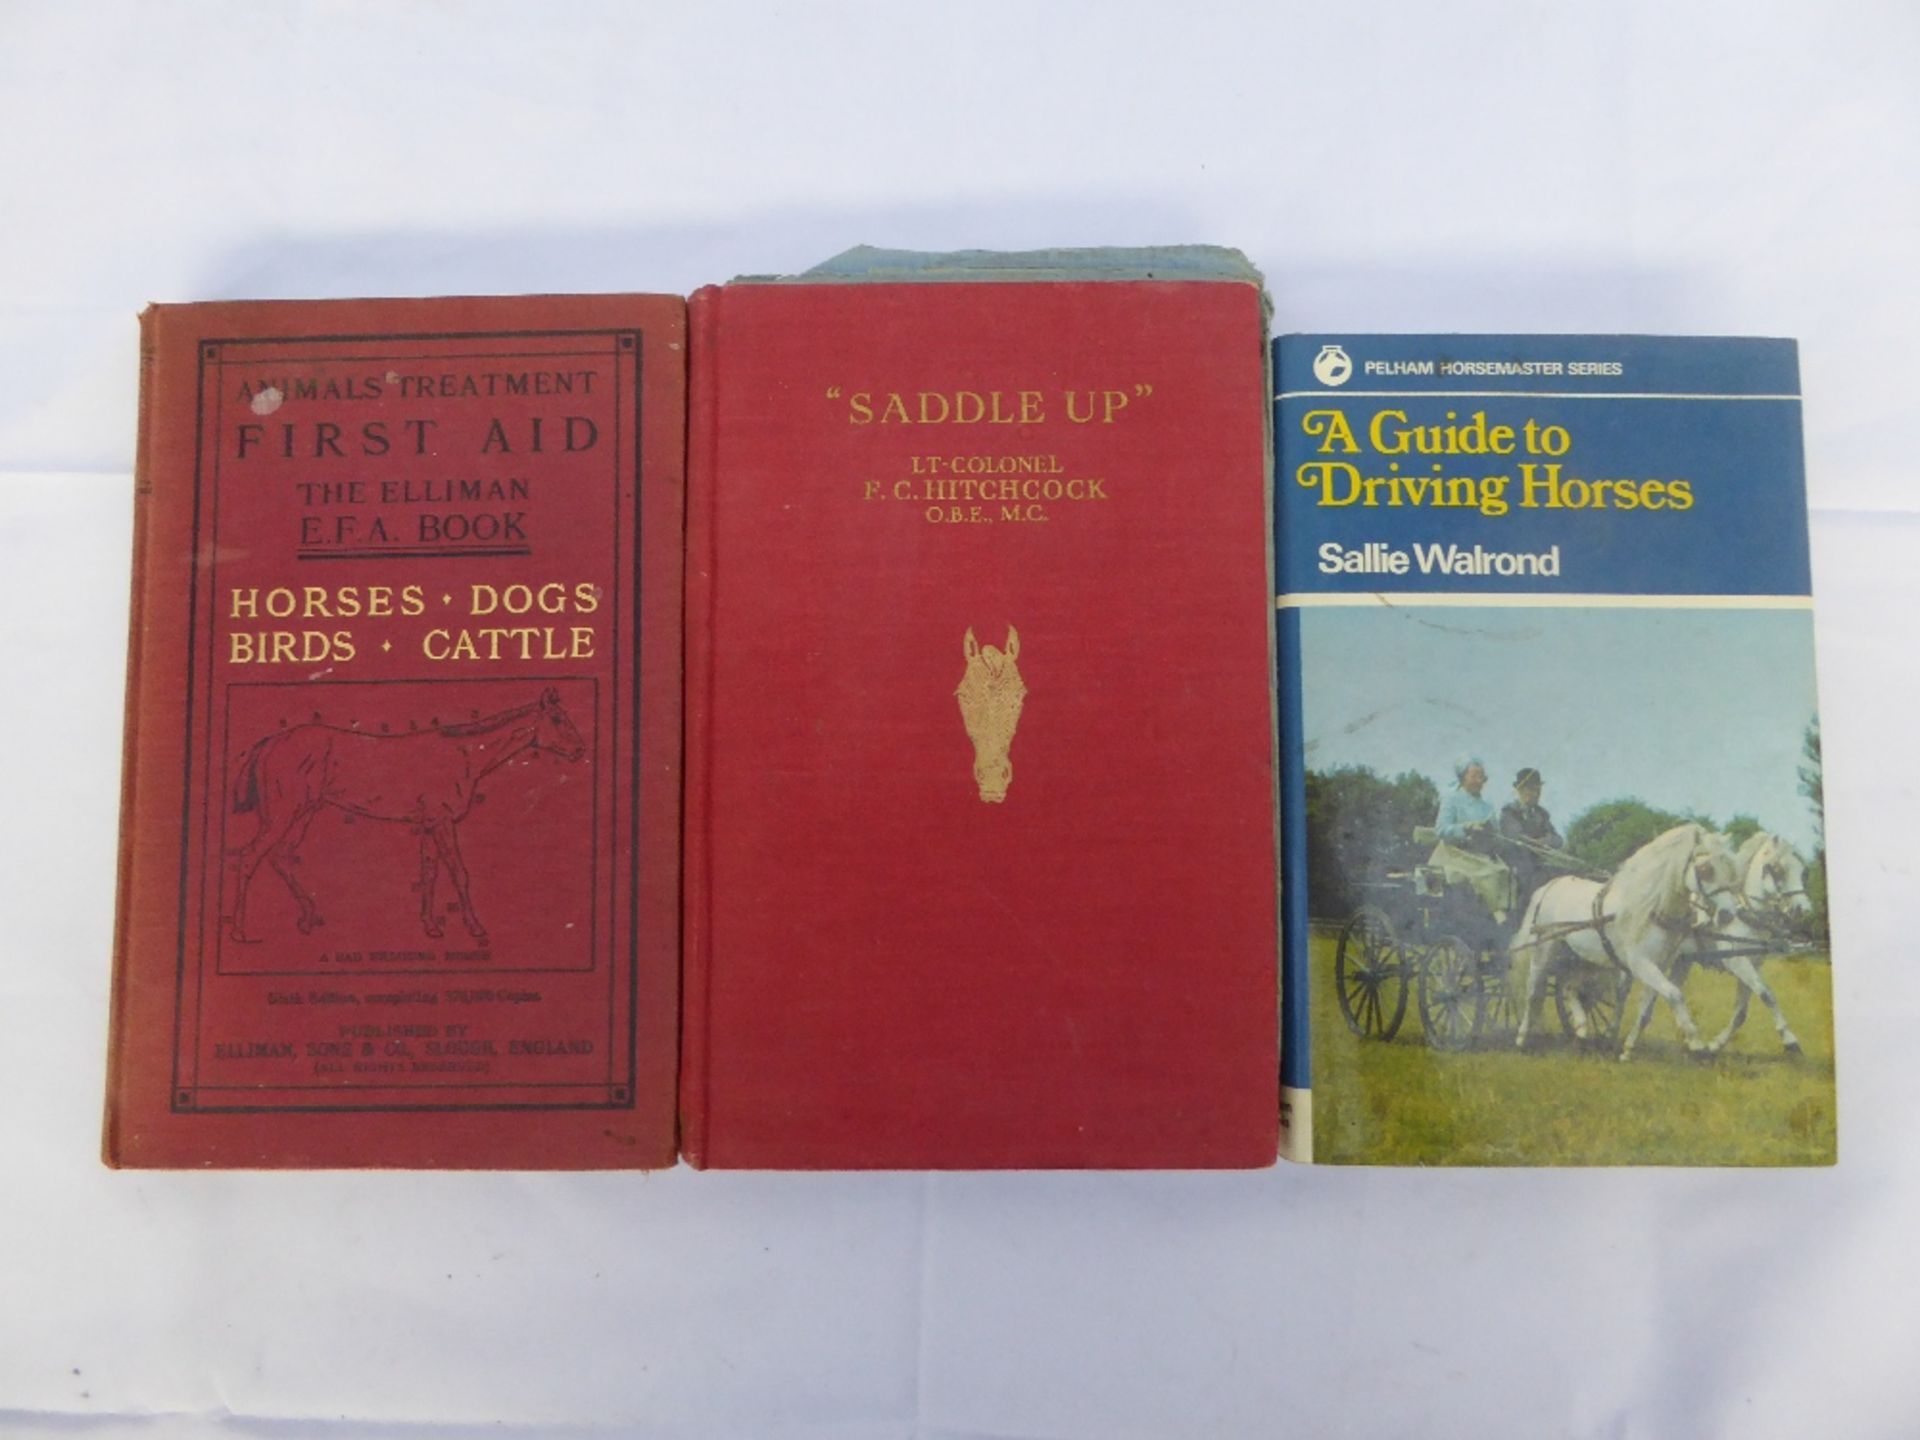 3 books - A Guide to Driving Horses by Sallie Walrond; Saddle Up by Lt. Col. F.C. Hitchcock, 1948; a